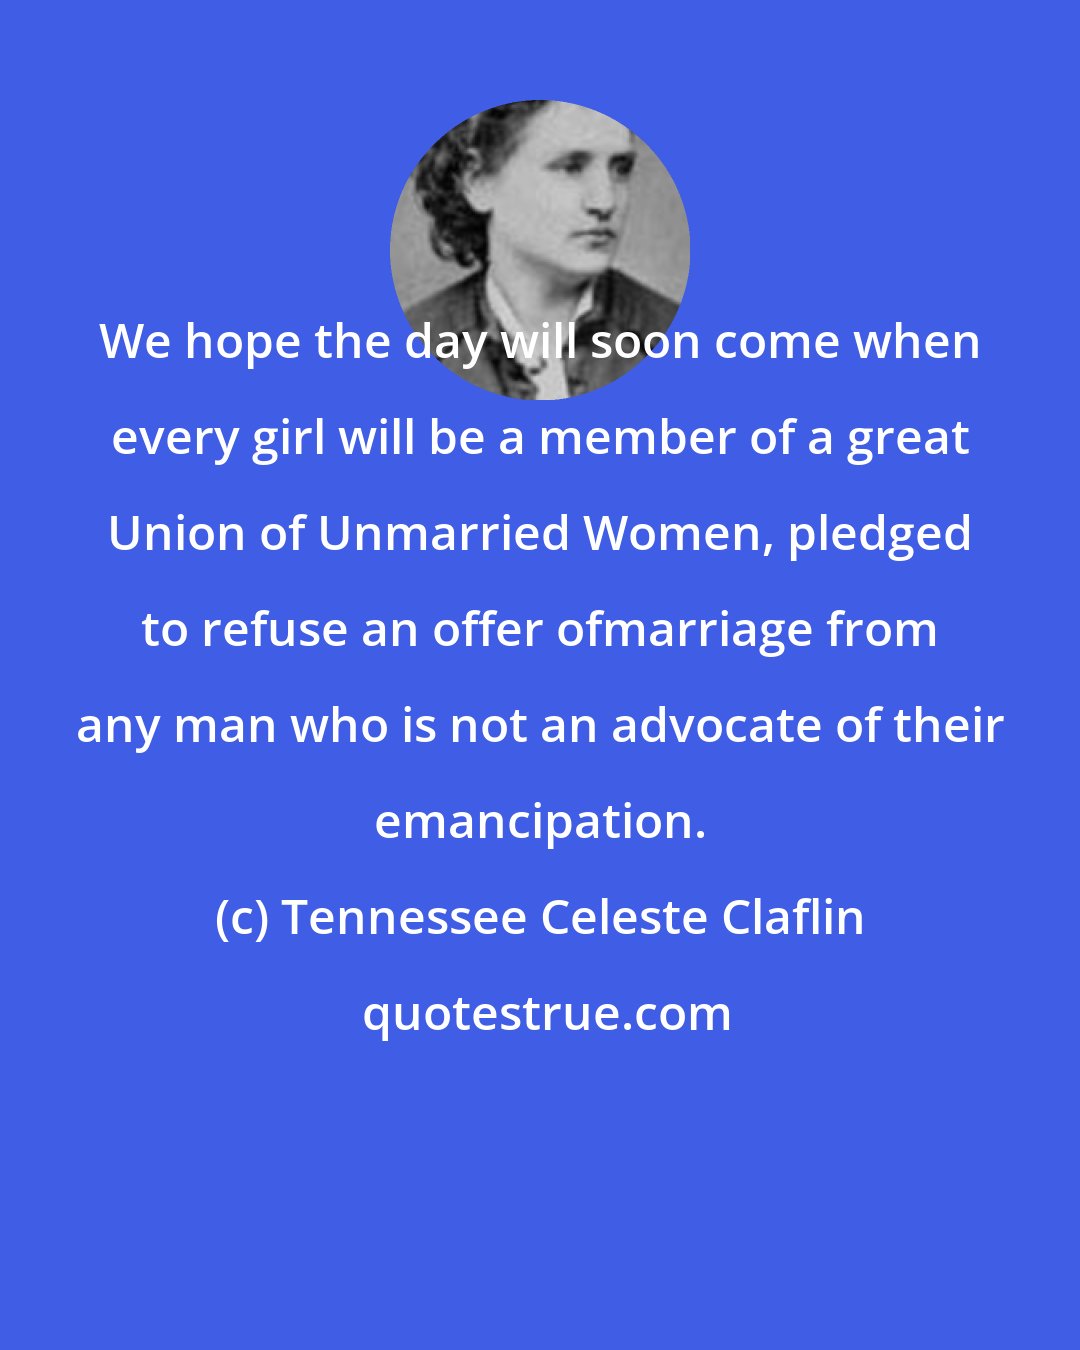 Tennessee Celeste Claflin: We hope the day will soon come when every girl will be a member of a great Union of Unmarried Women, pledged to refuse an offer ofmarriage from any man who is not an advocate of their emancipation.